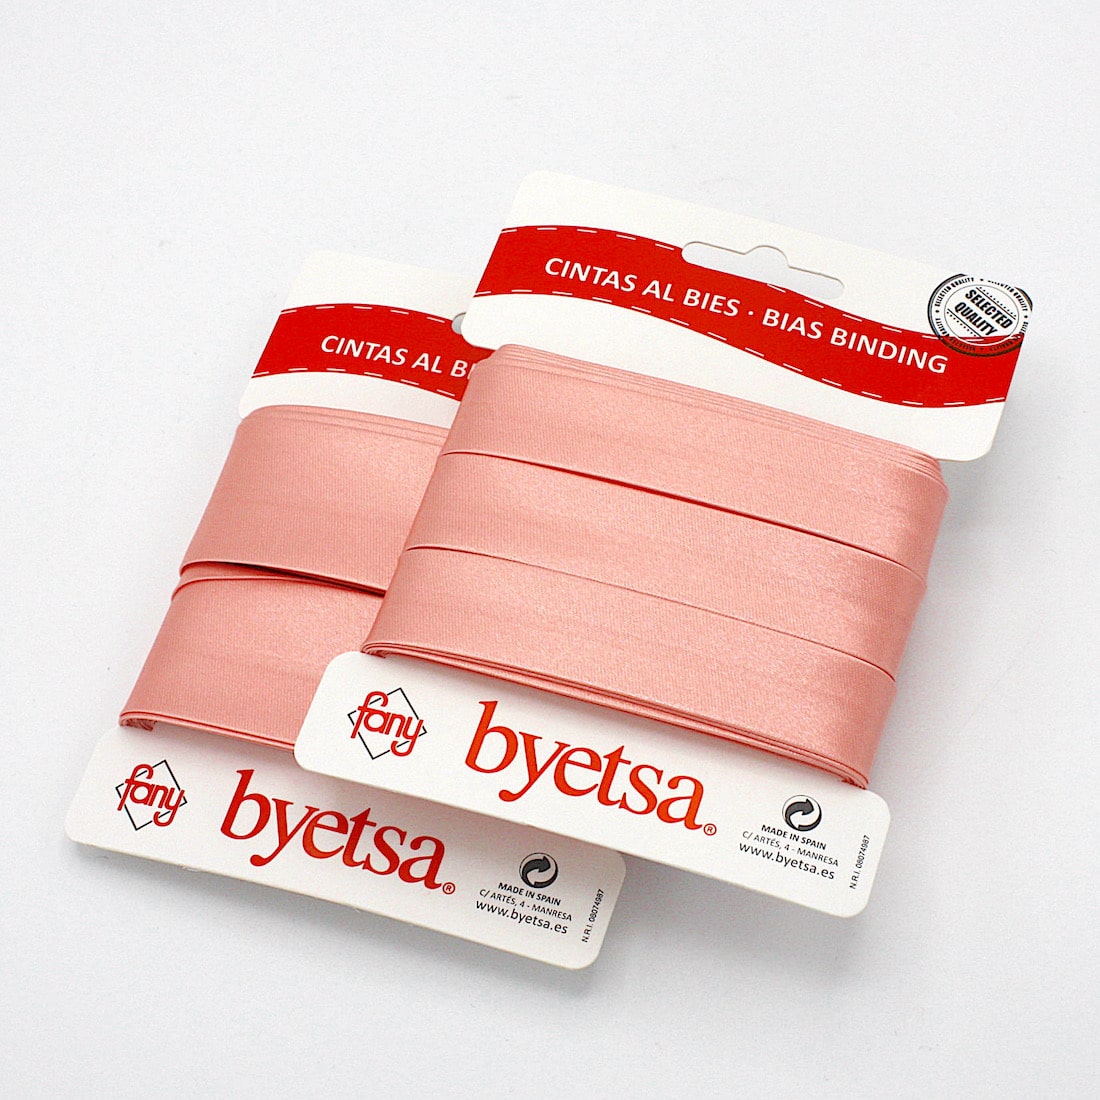 5 metres of Pre-packed Satin Bias Binding Tape in 18mm and 30mm width in Pastel Blush 80